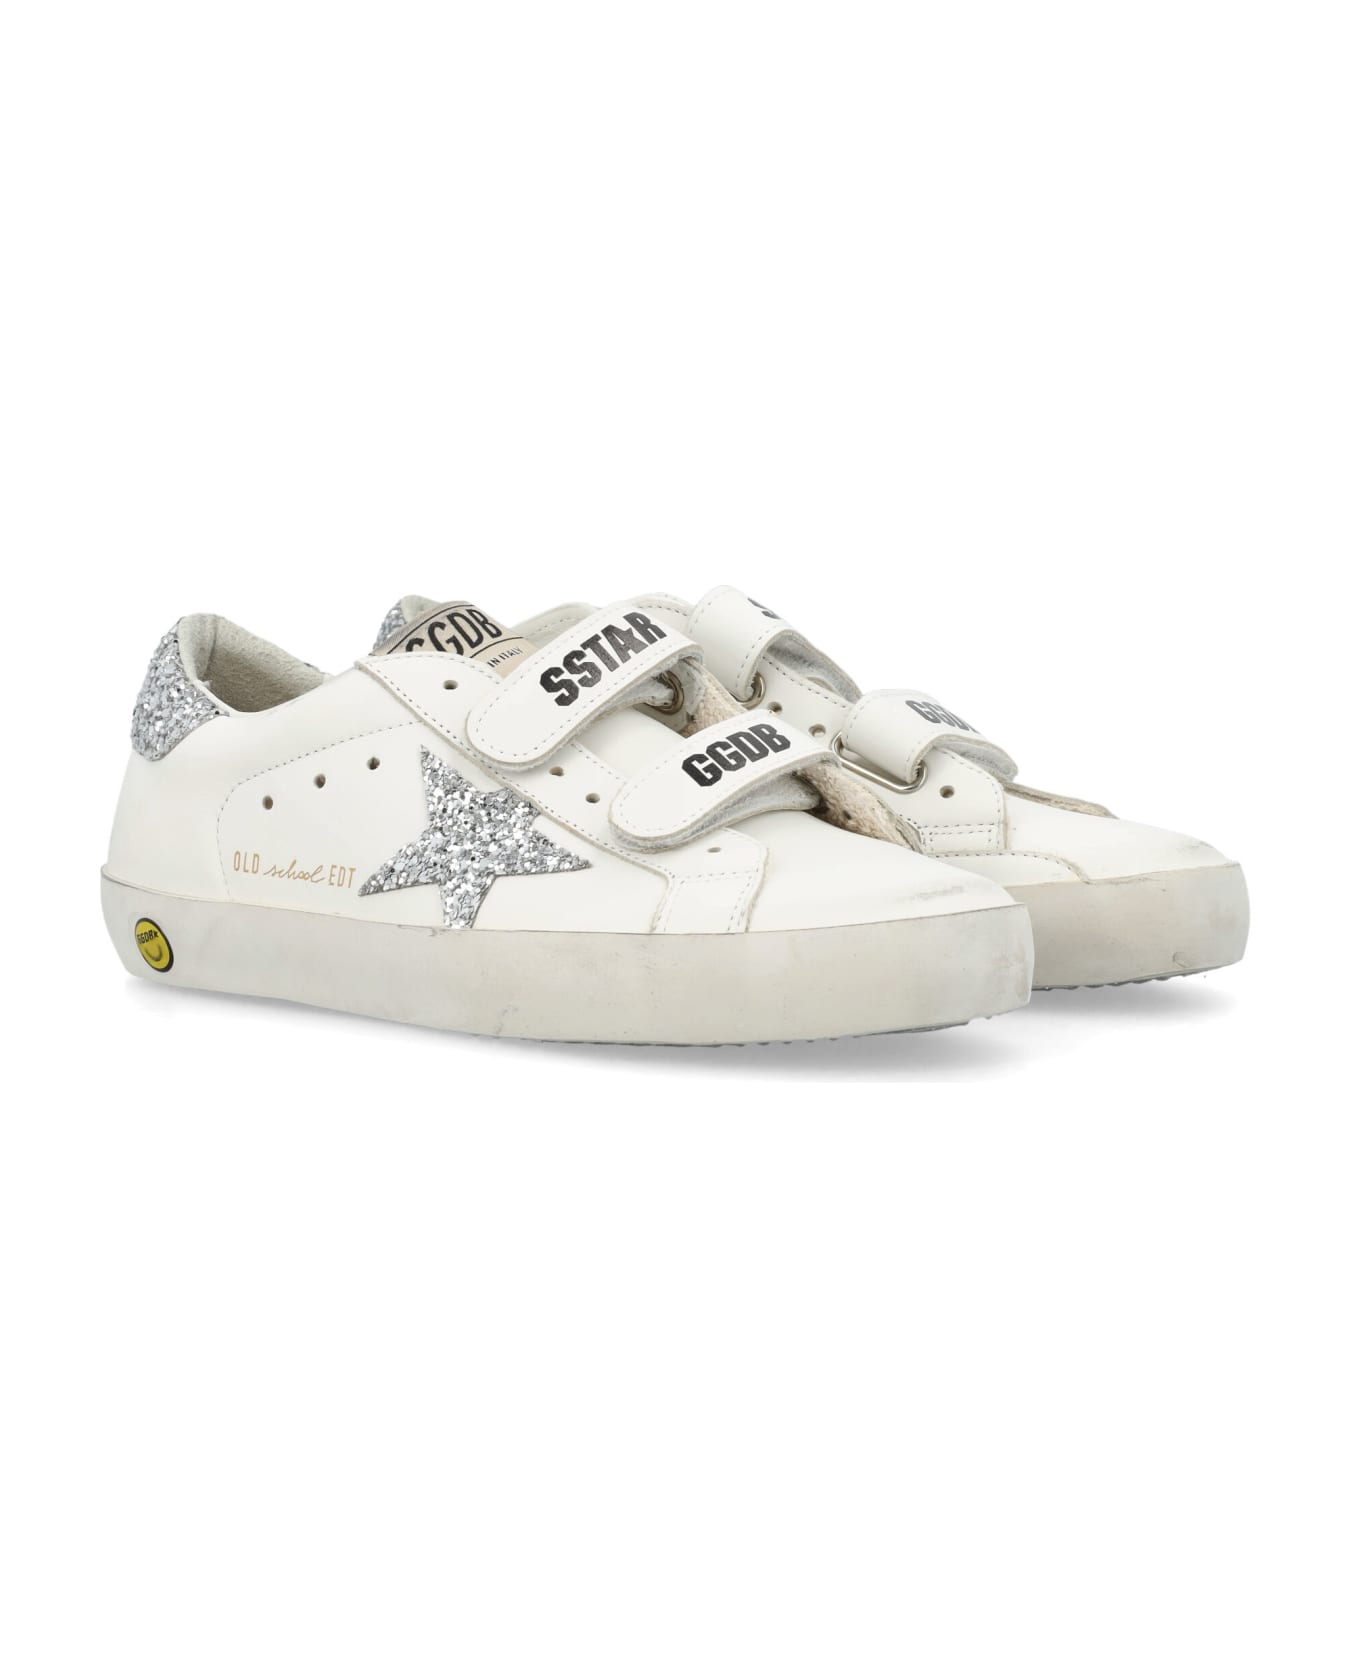 Golden Goose Old School Sneakers - WHITE/ICE/SILVER